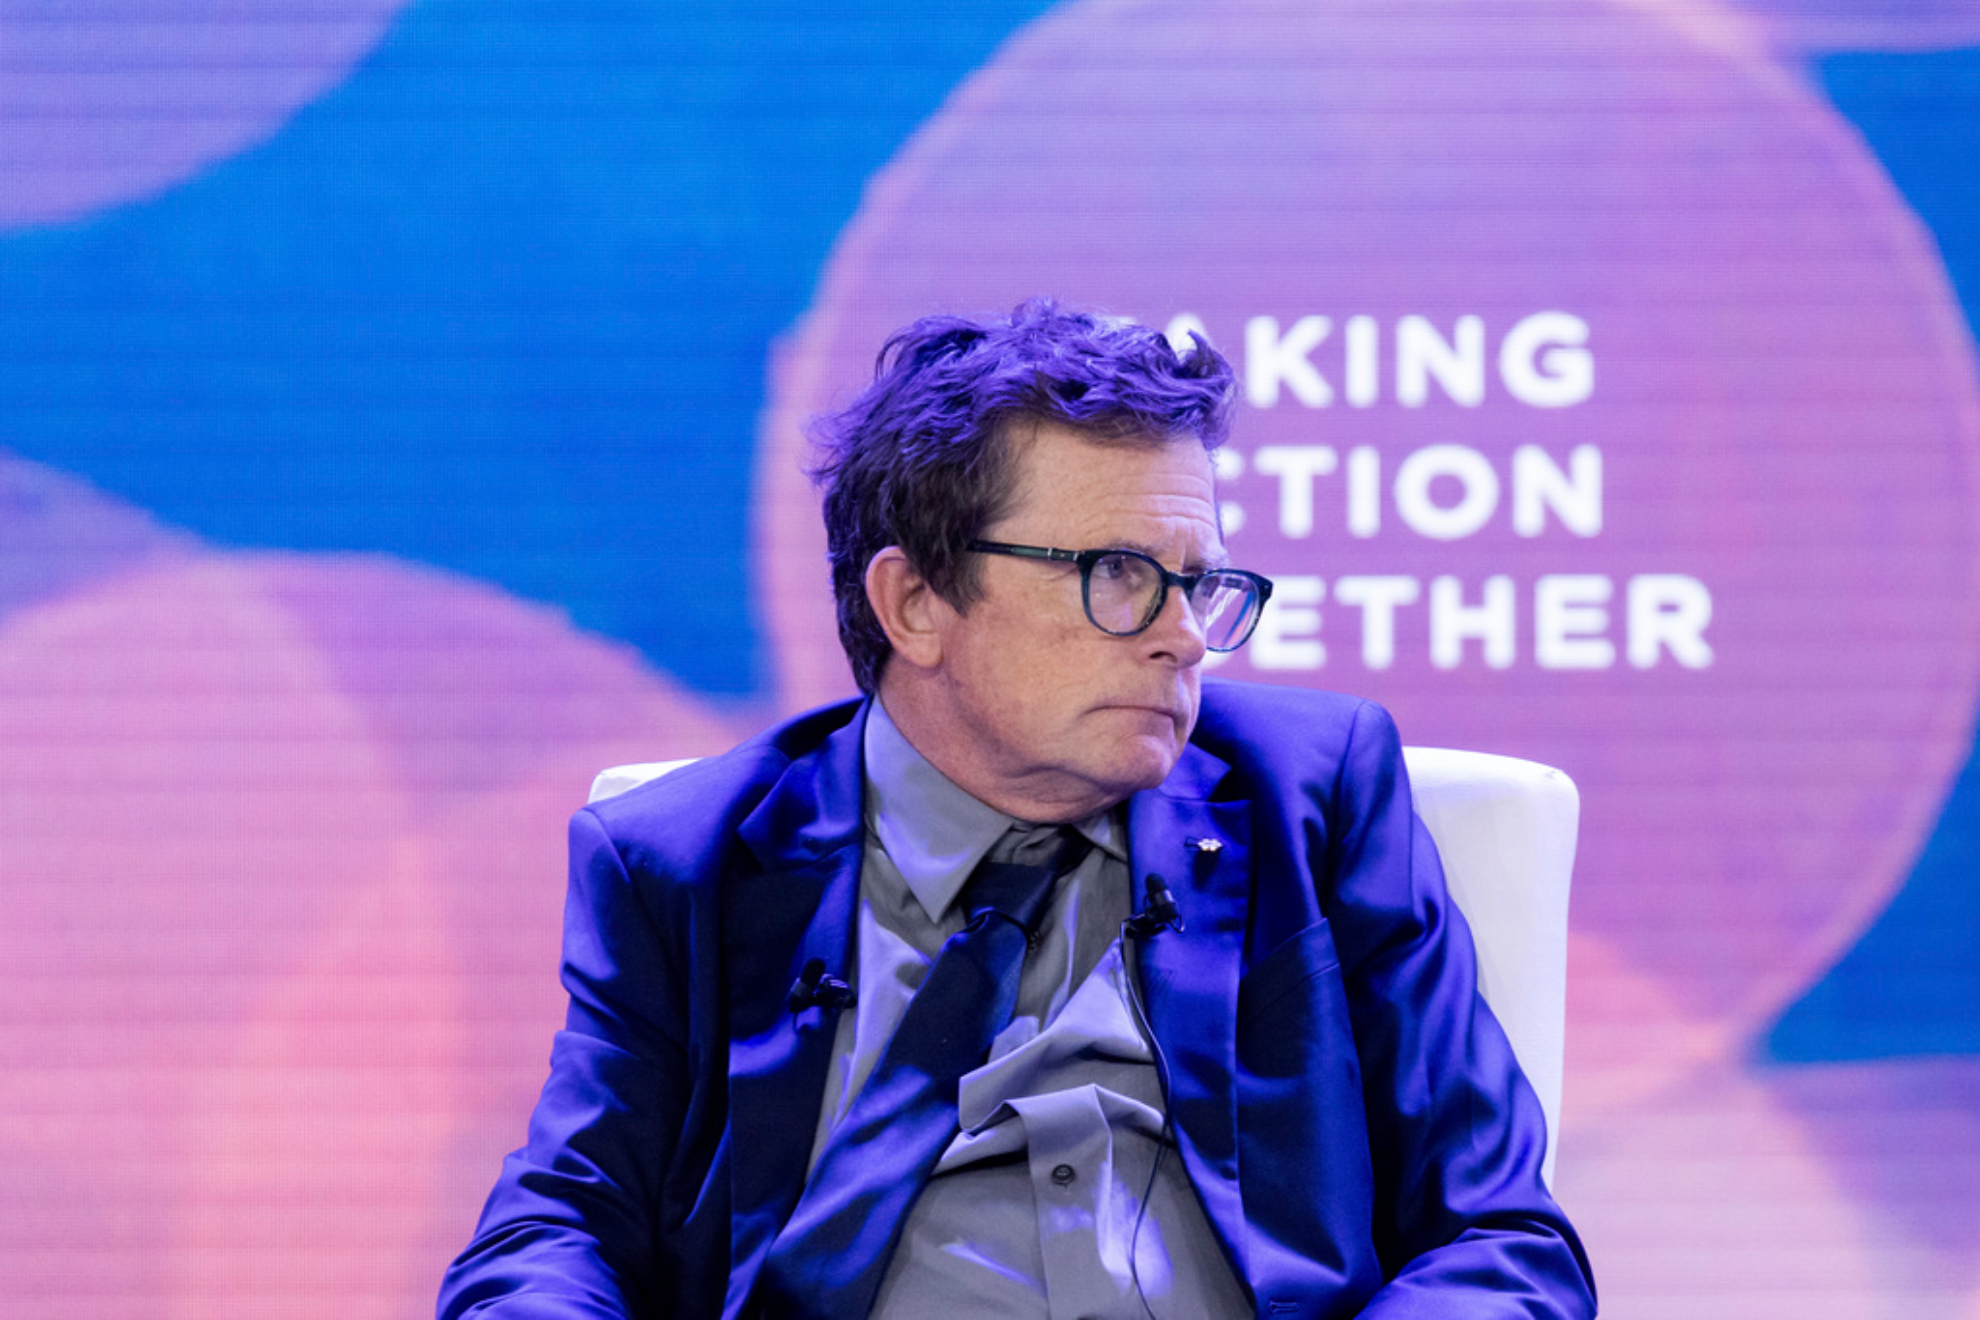 Michael J. Fox acknowledges his Parkinson's progression while claiming he is not afraid to die